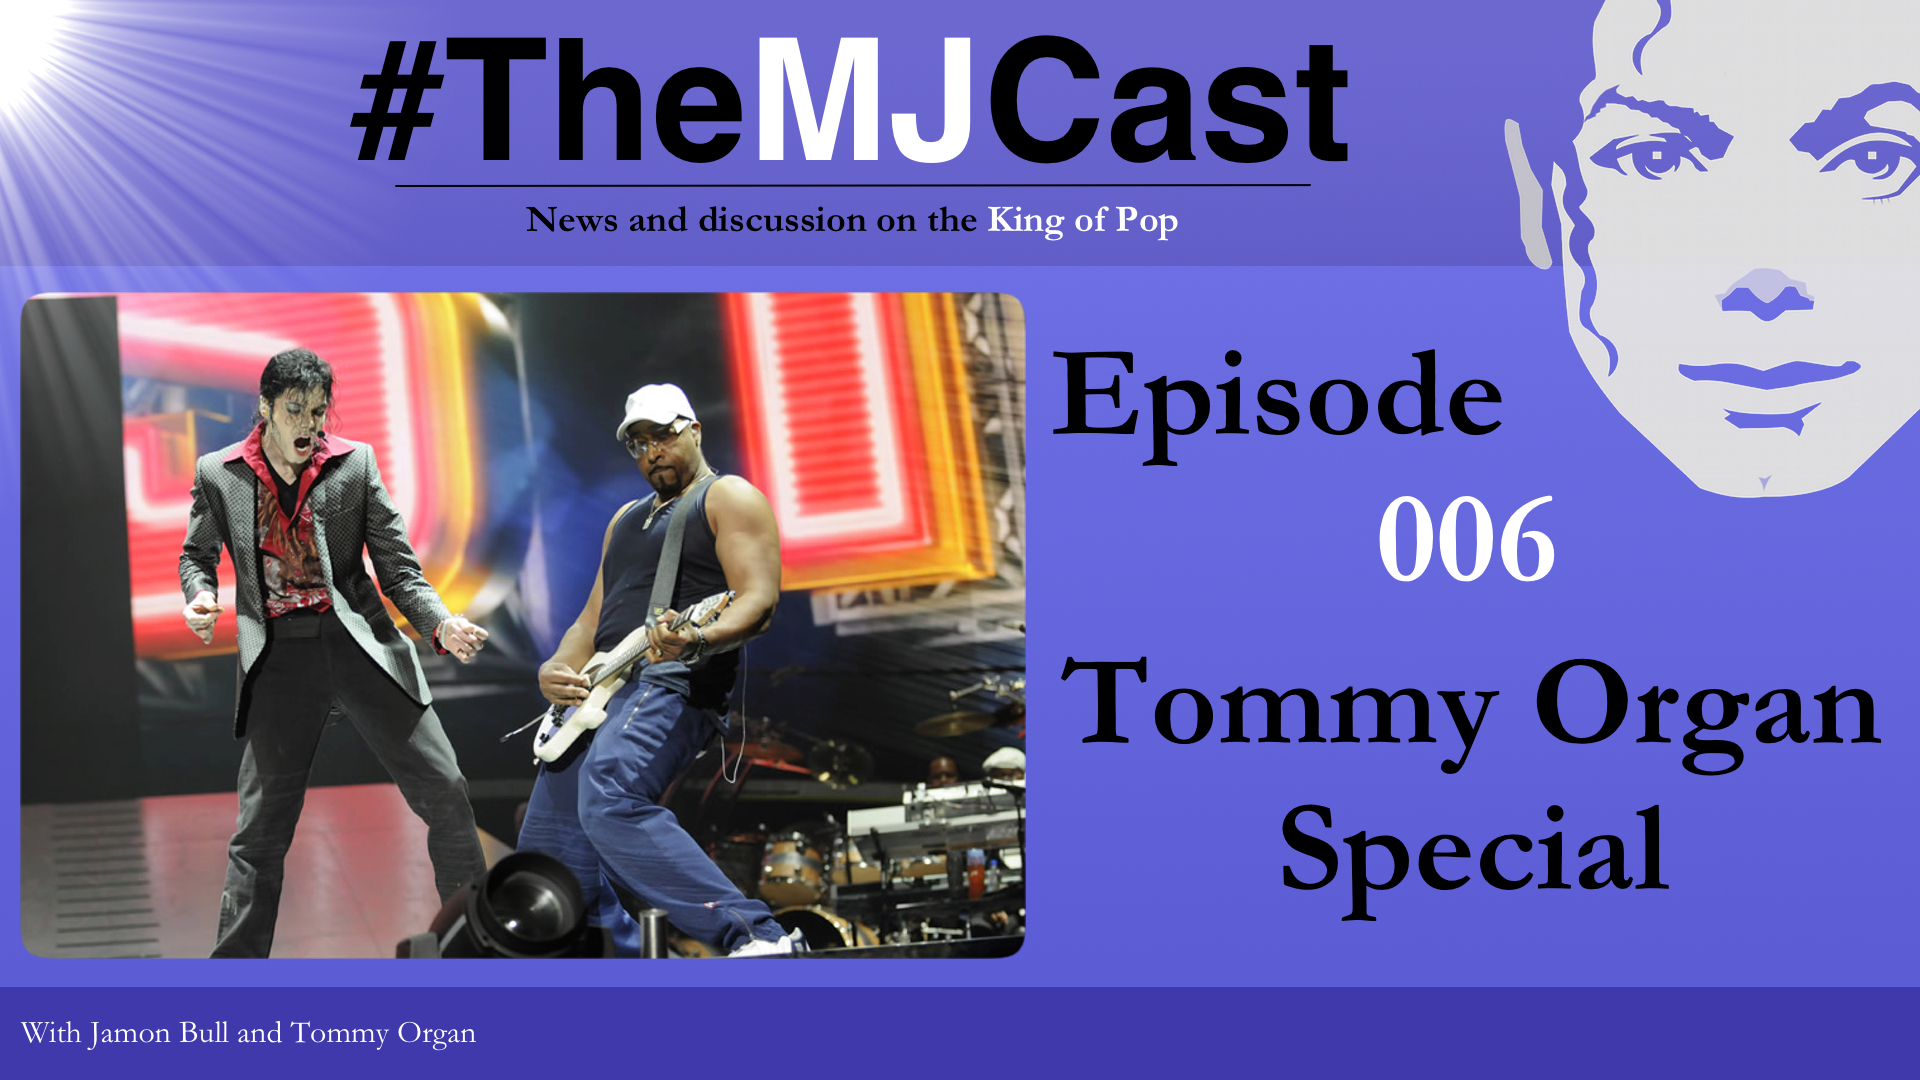 Episode 006 - Tommy Organ Special YouTube Art